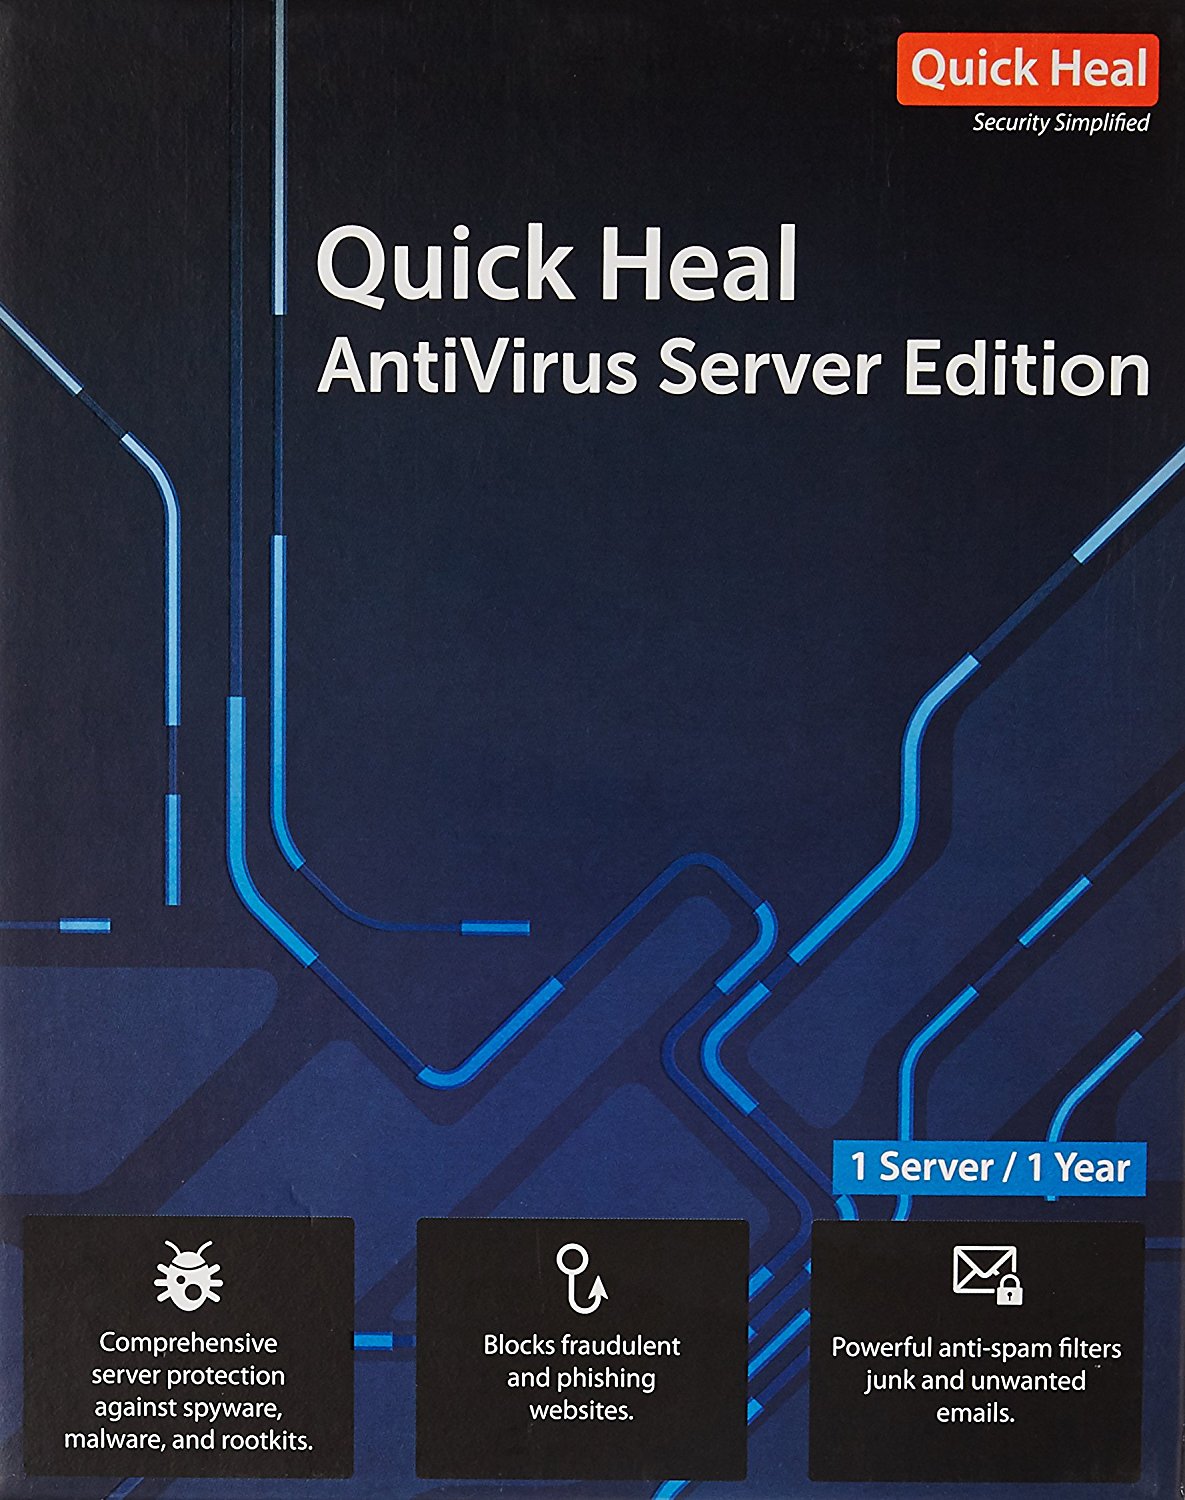 quick healing malware for server edition